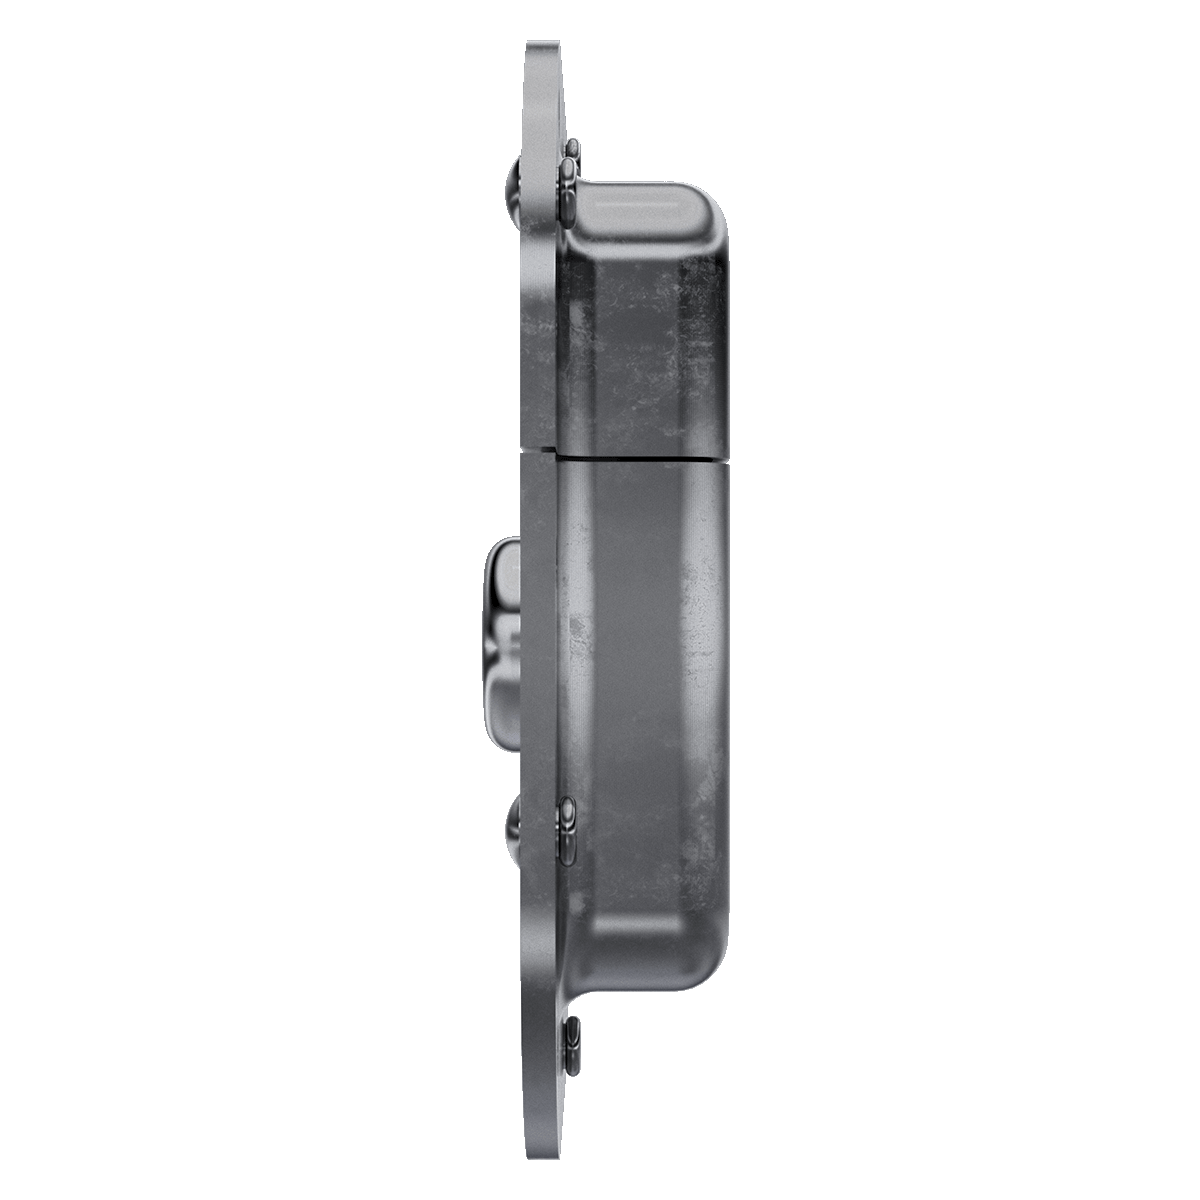 Key lockable Recessed Catch, front view with keys